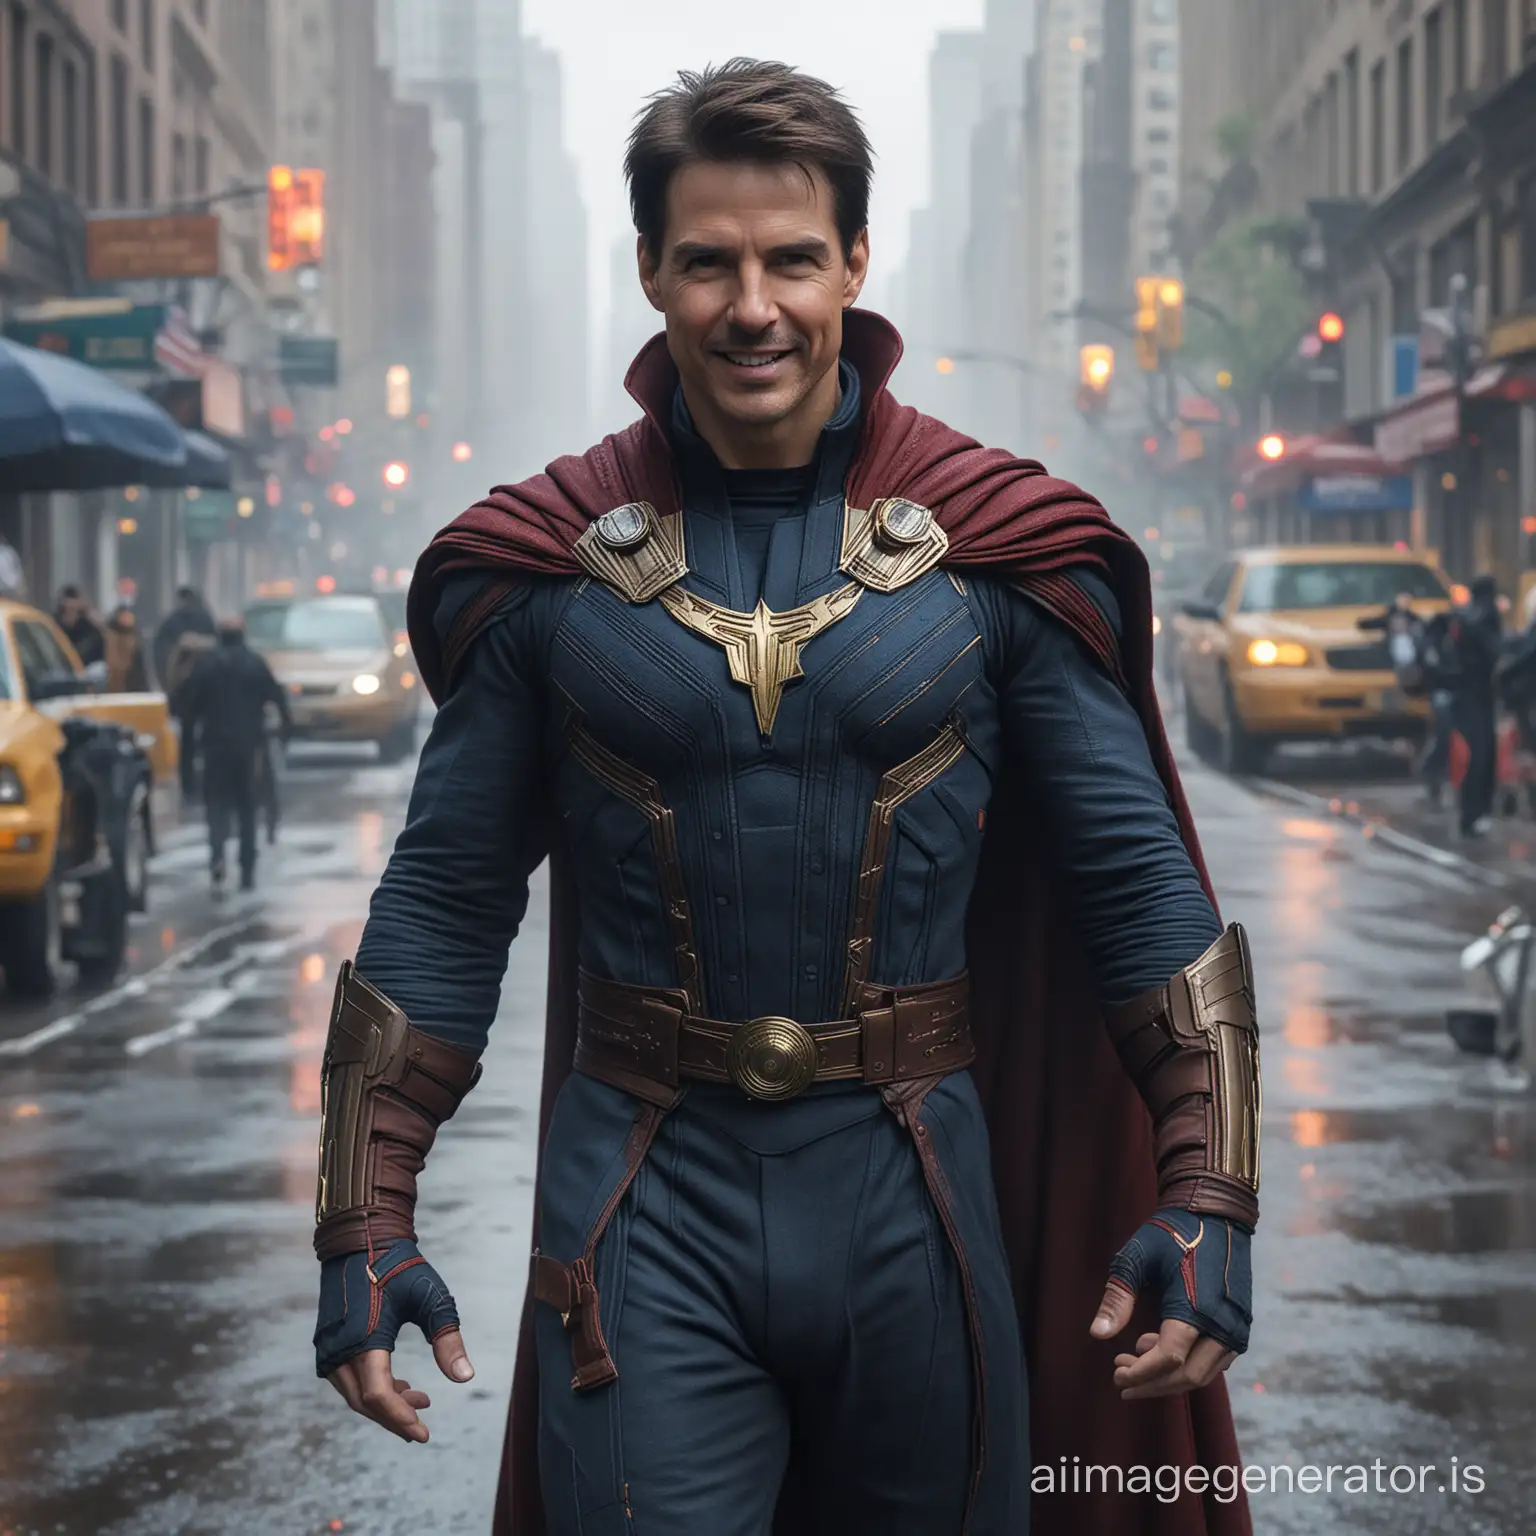 Tom Cruise in original Dr. Strange suit, smile in camera, No Mask, semi full body, 16k photography, high resolution, in foggy new York street as background.